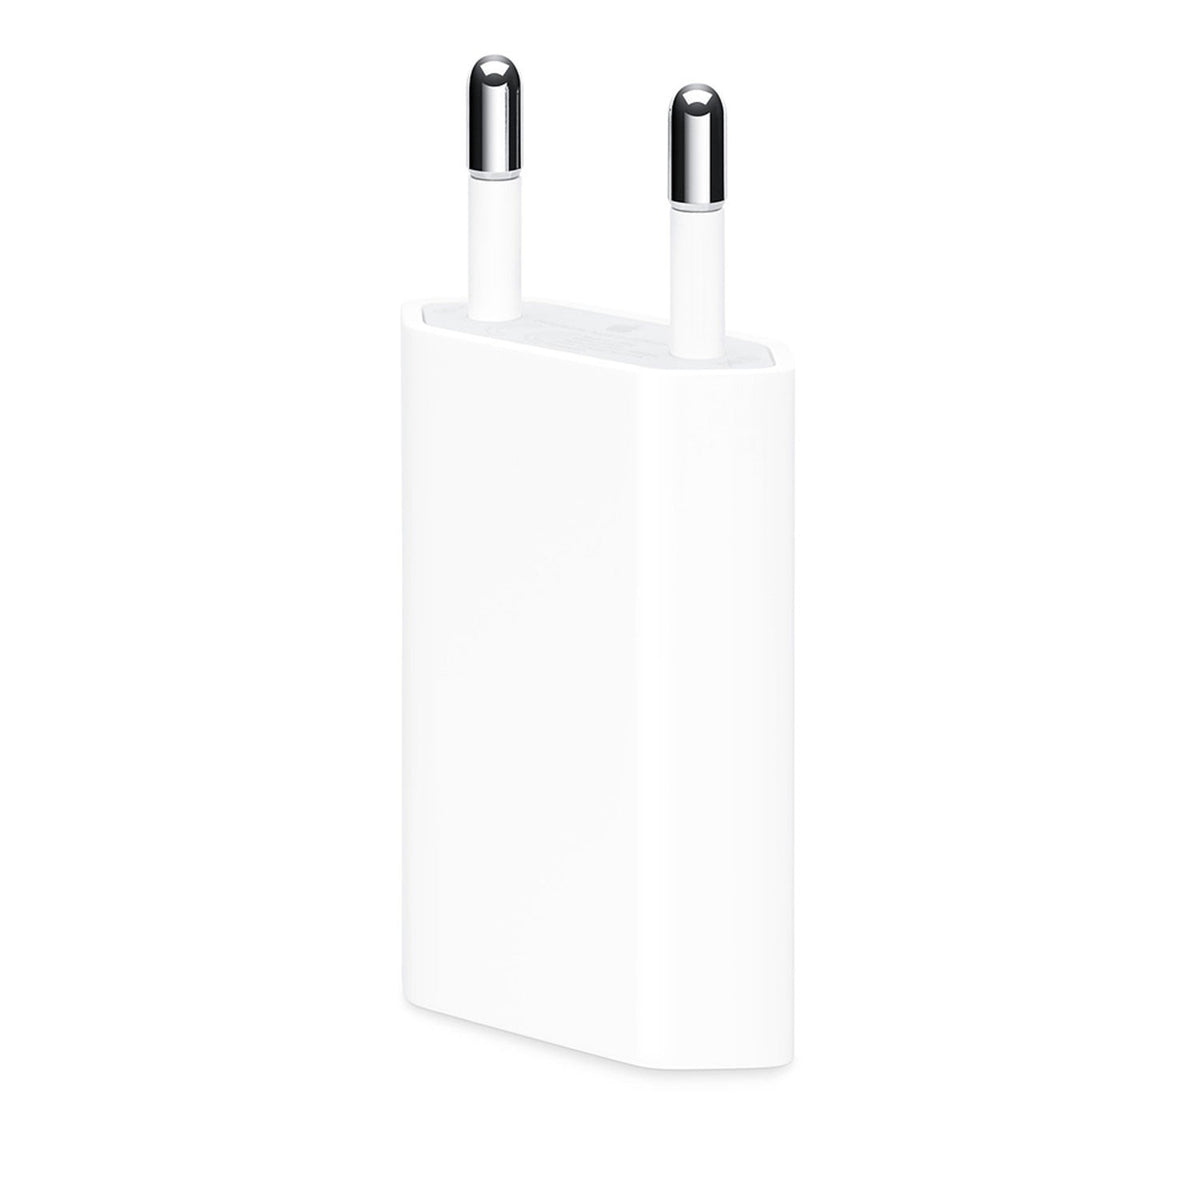 5W USB POWER ADAPTER FOR IPHONE - EU VERSION